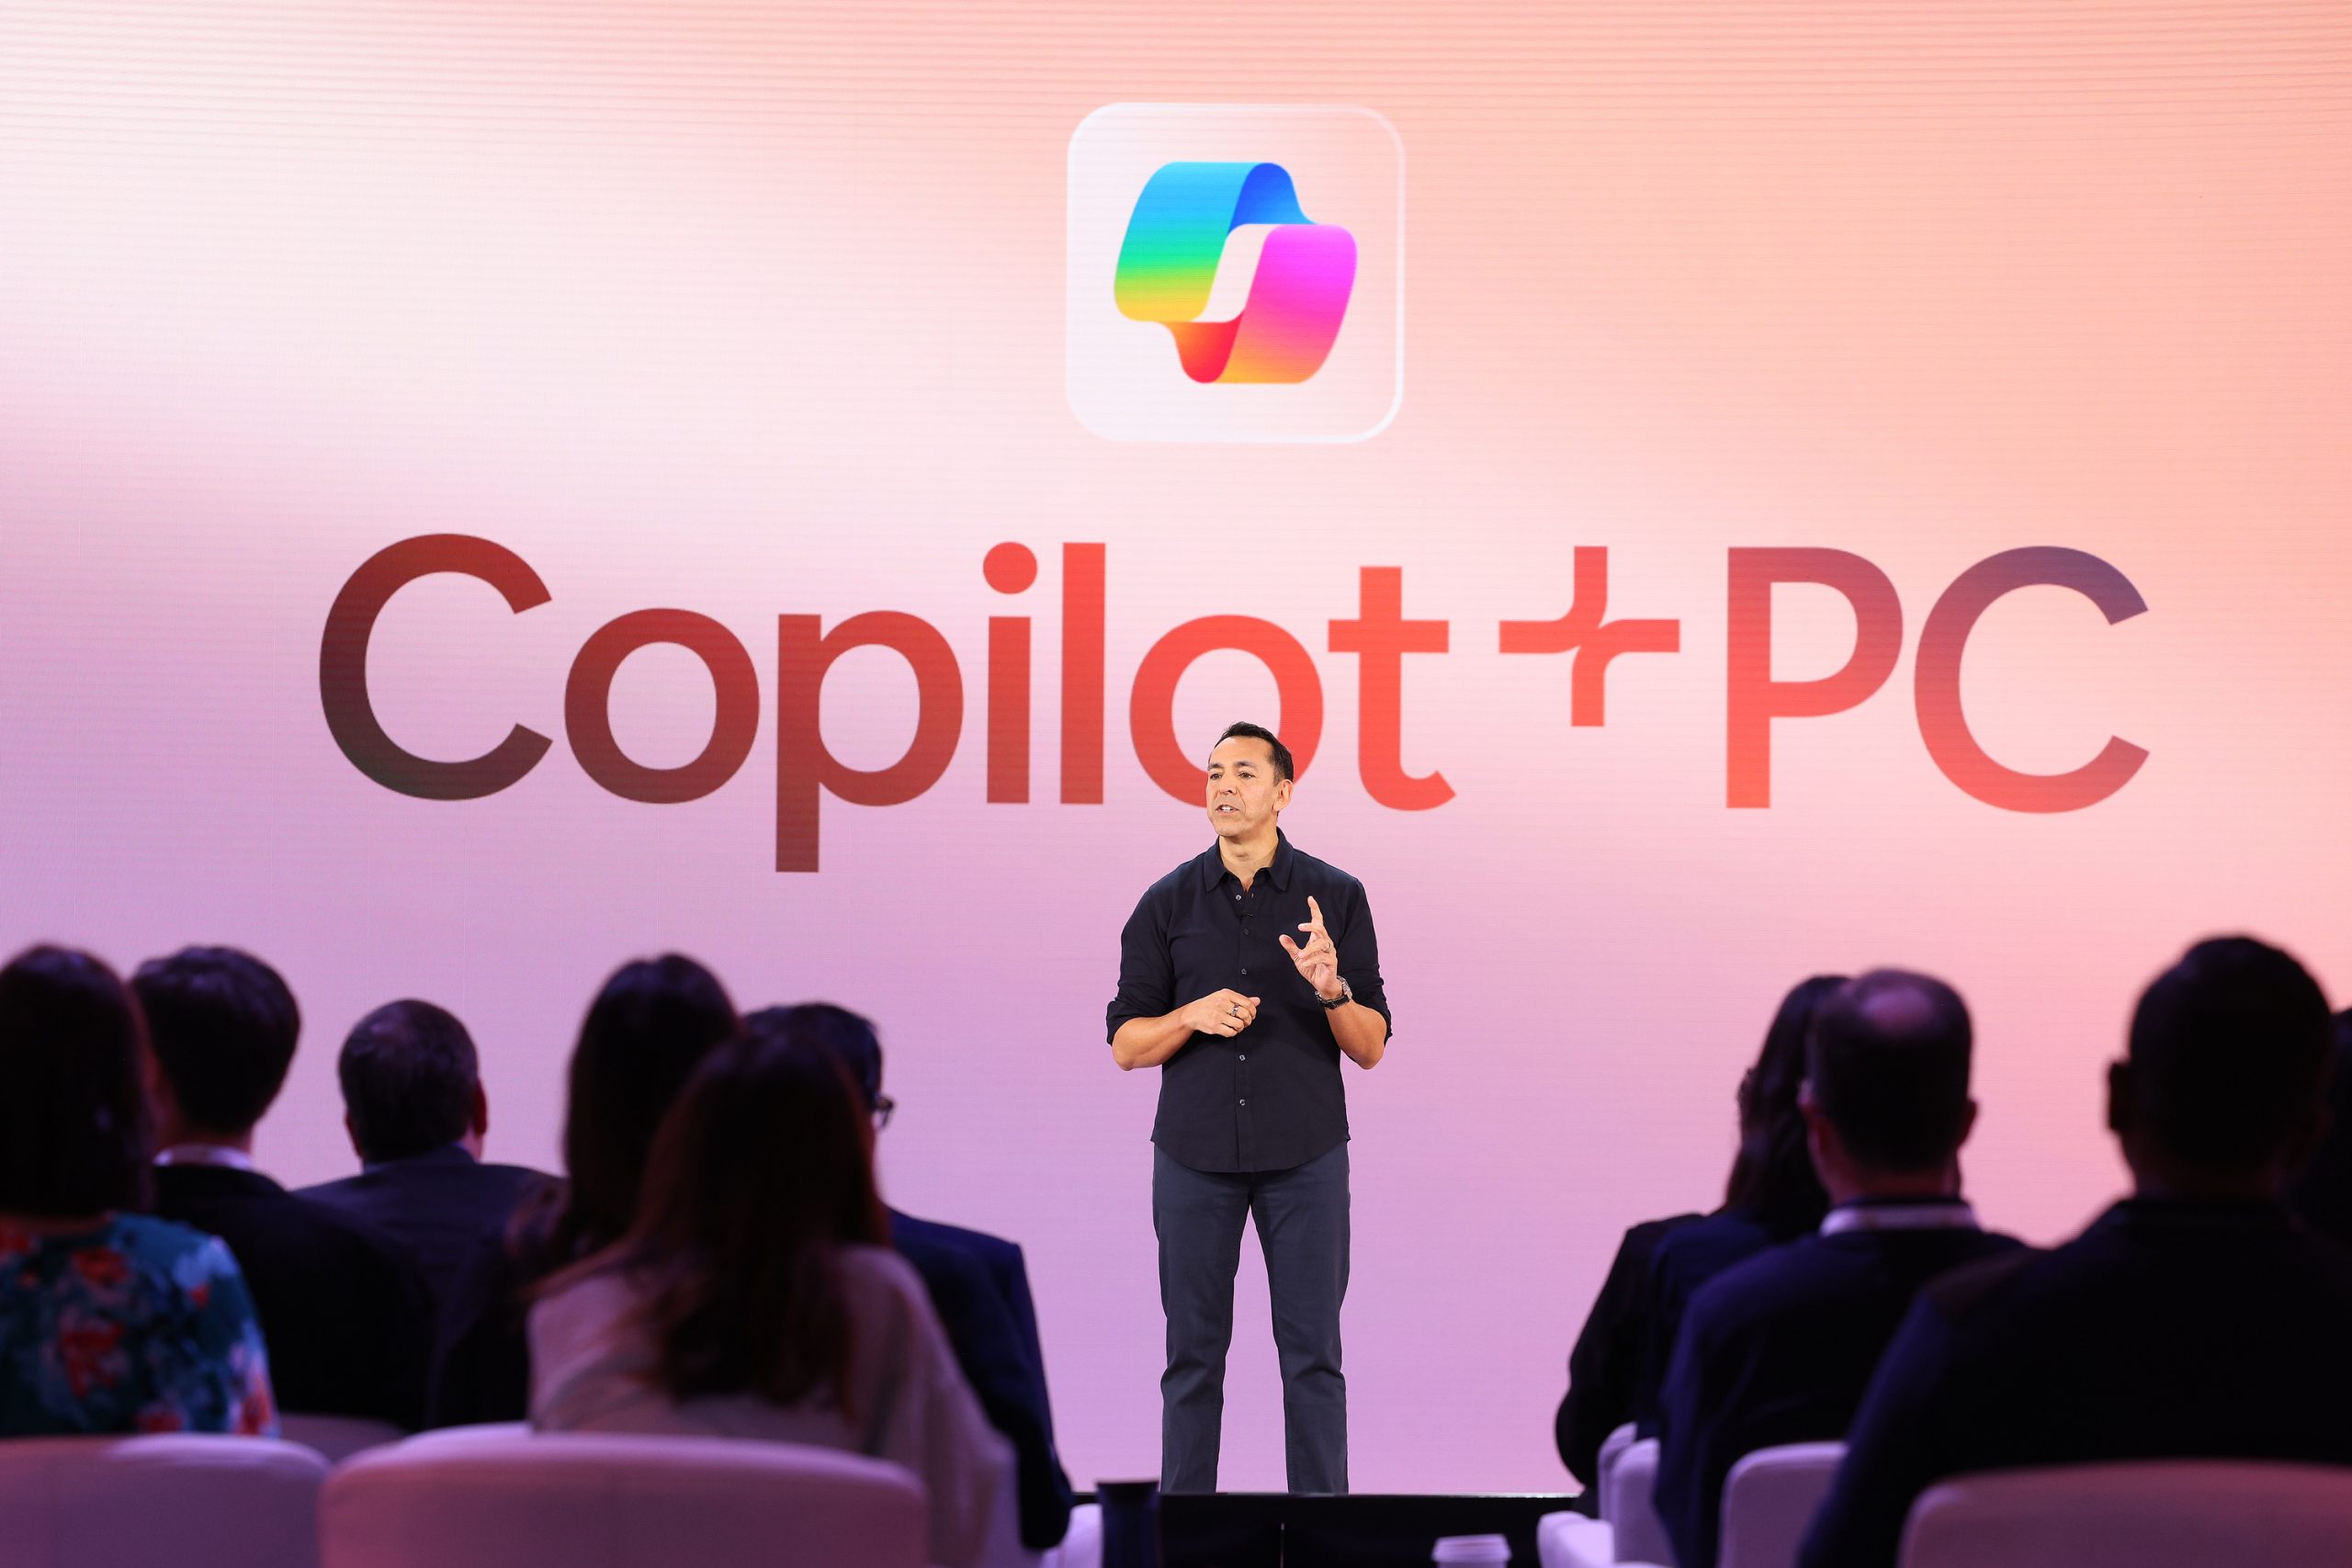 A man standing on stage in front of an audience with the Copilot+ PC logo on a rose-gold screen behind him.